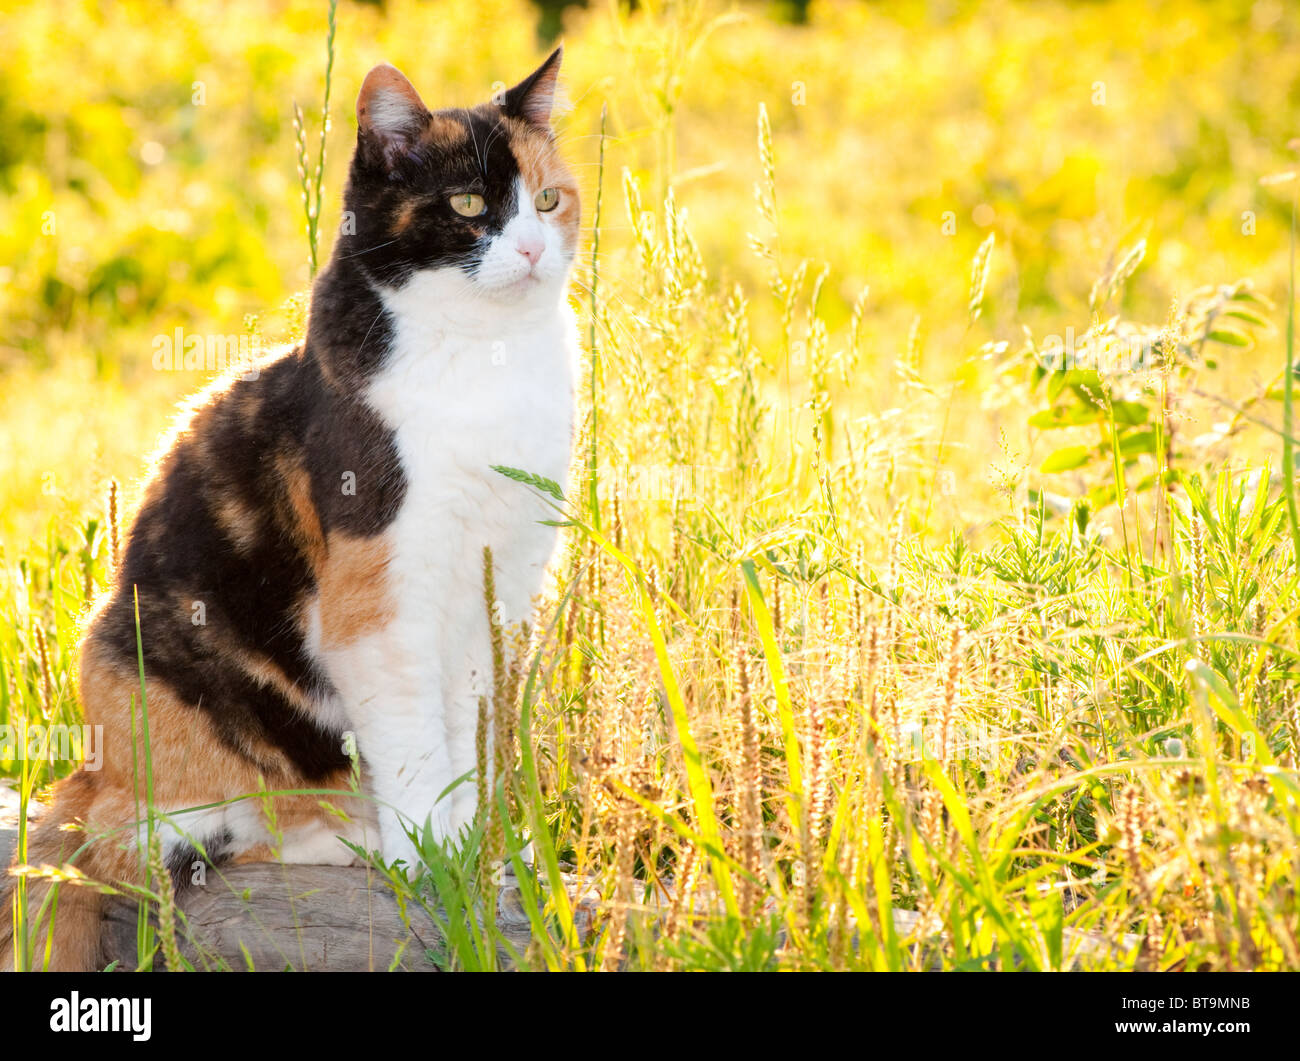 Beautiful calico cat in high grass with bright sunshine Stock Photo